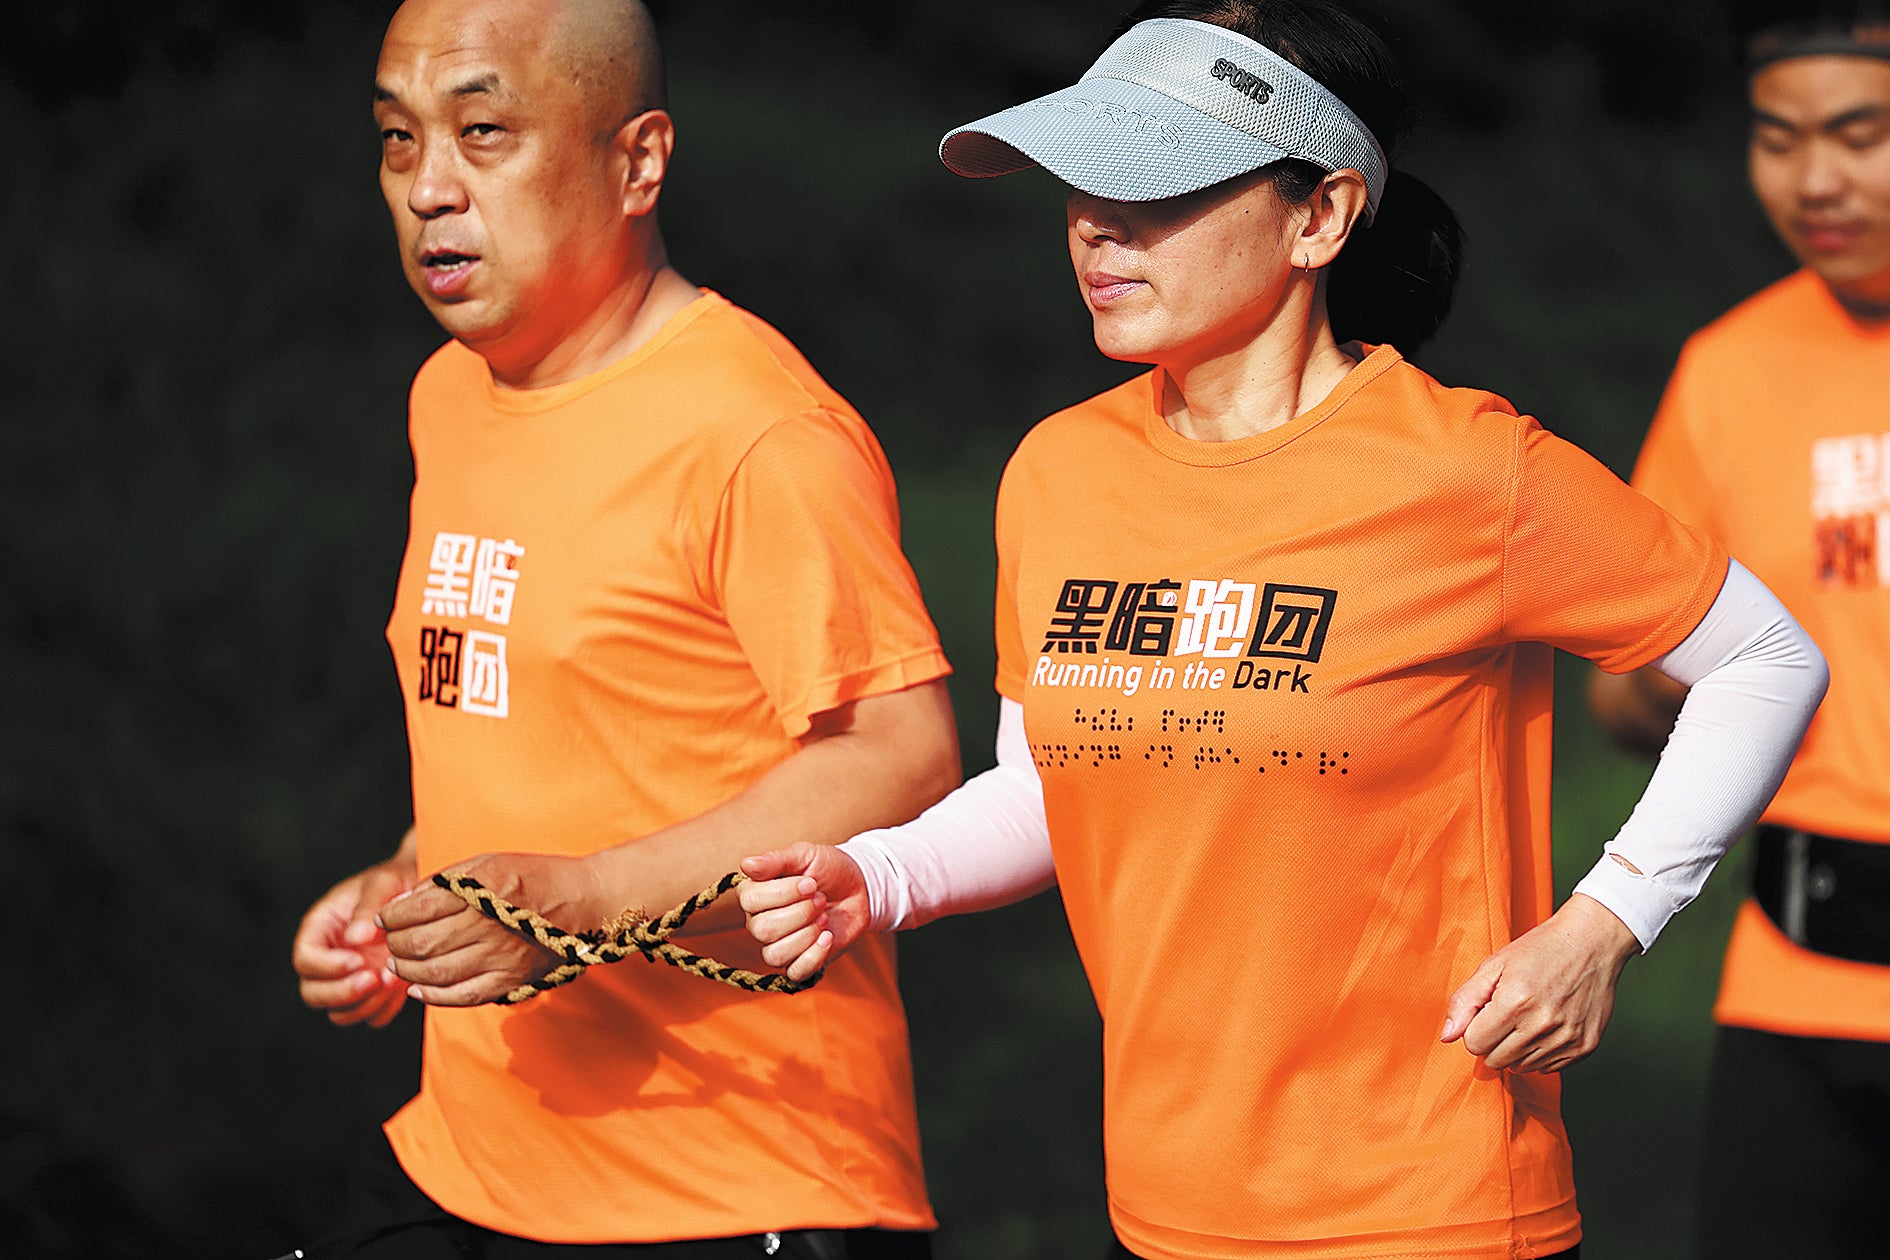 A volunteer guides a visually impaired runner with a hemp rope at the Beijing Olympic Forest Park